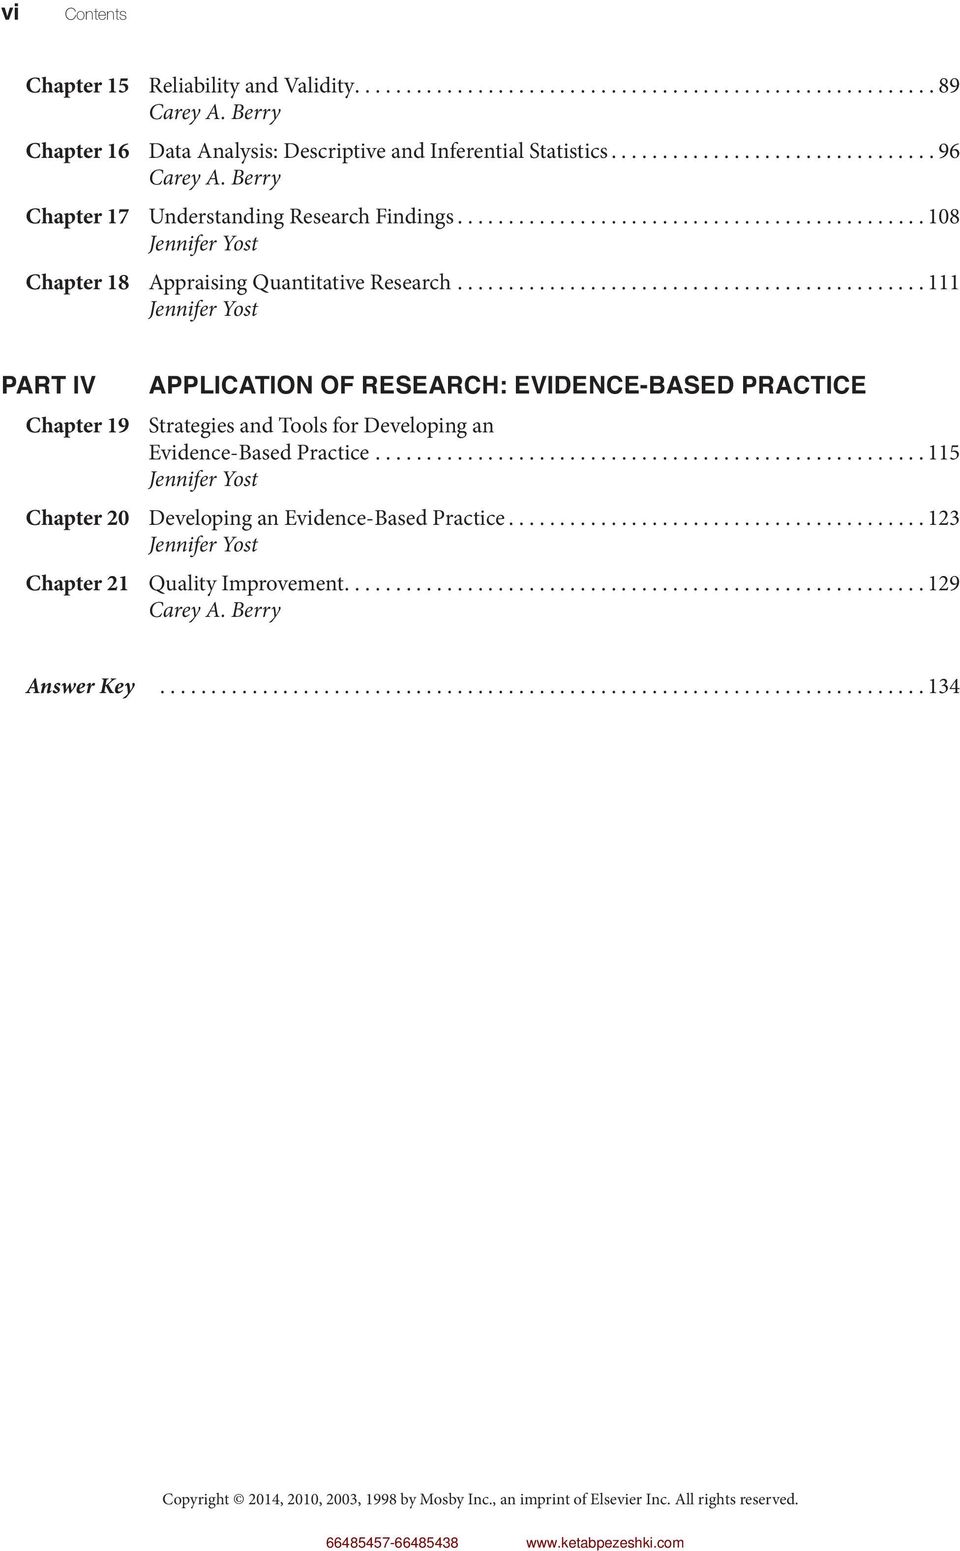 ..111 Jennifer Yost PART IV APPLICATION OF RESEARCH: EVIDENCE-BASED PRACTICE Chapter 19 Strategies and Tools for Developing an Evidence-Based